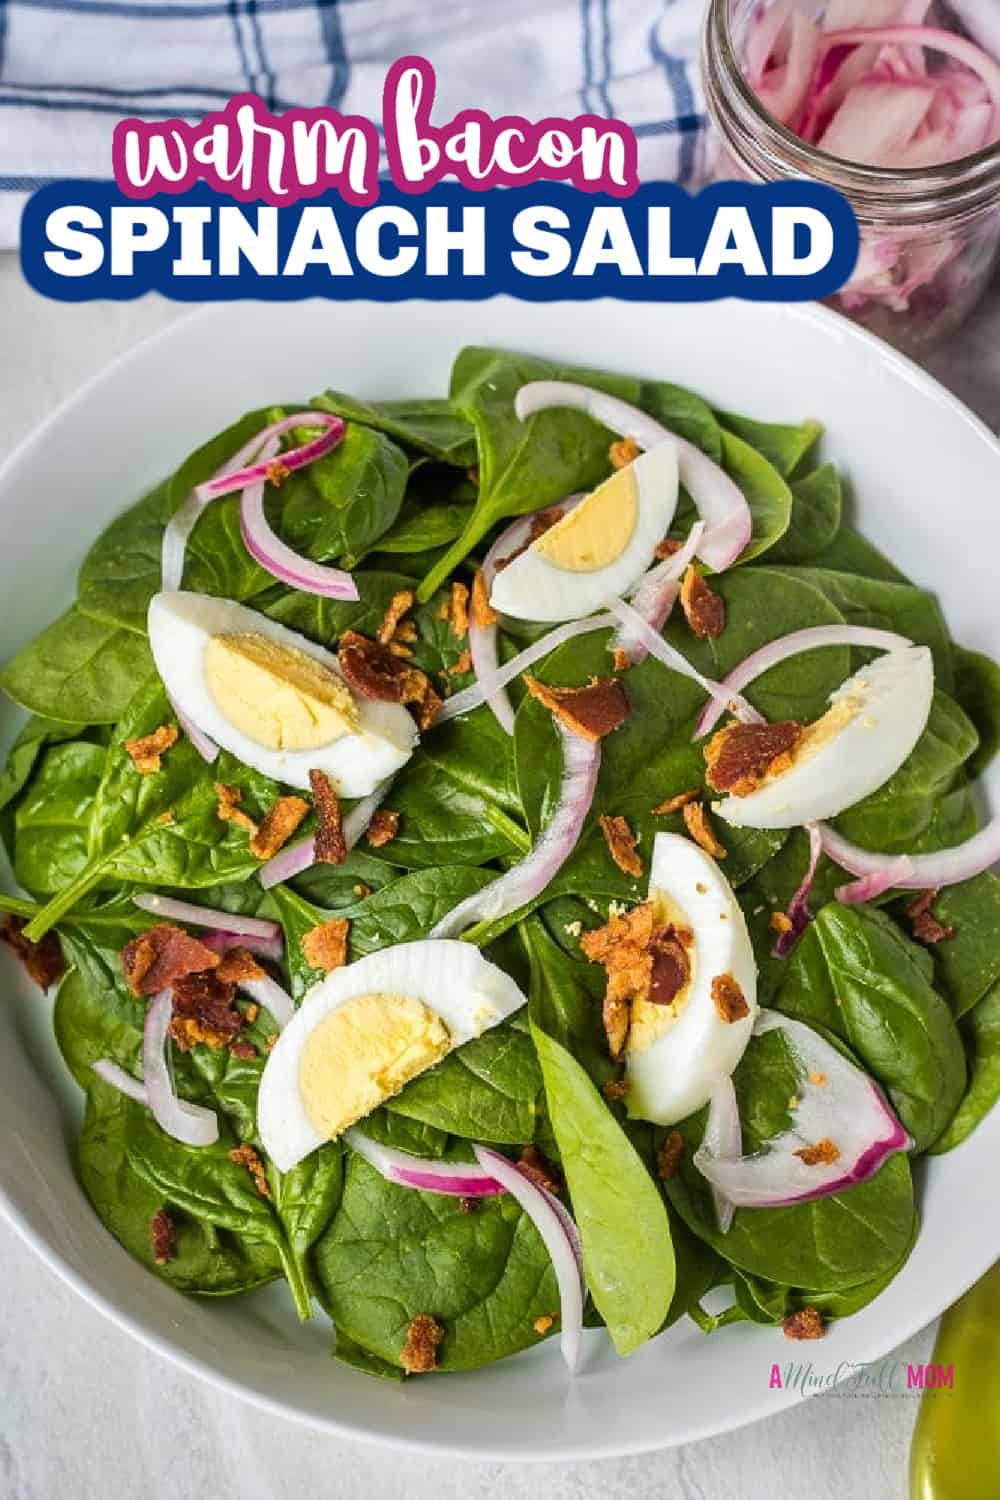 This Spinach Bacon Salad is an easy, yet impressive salad recipe. Made with tenderspinach, hard-boiled eggs, crispy bacon, and a warm bacon dressing, this spinach salad is packed with incredible flavor.